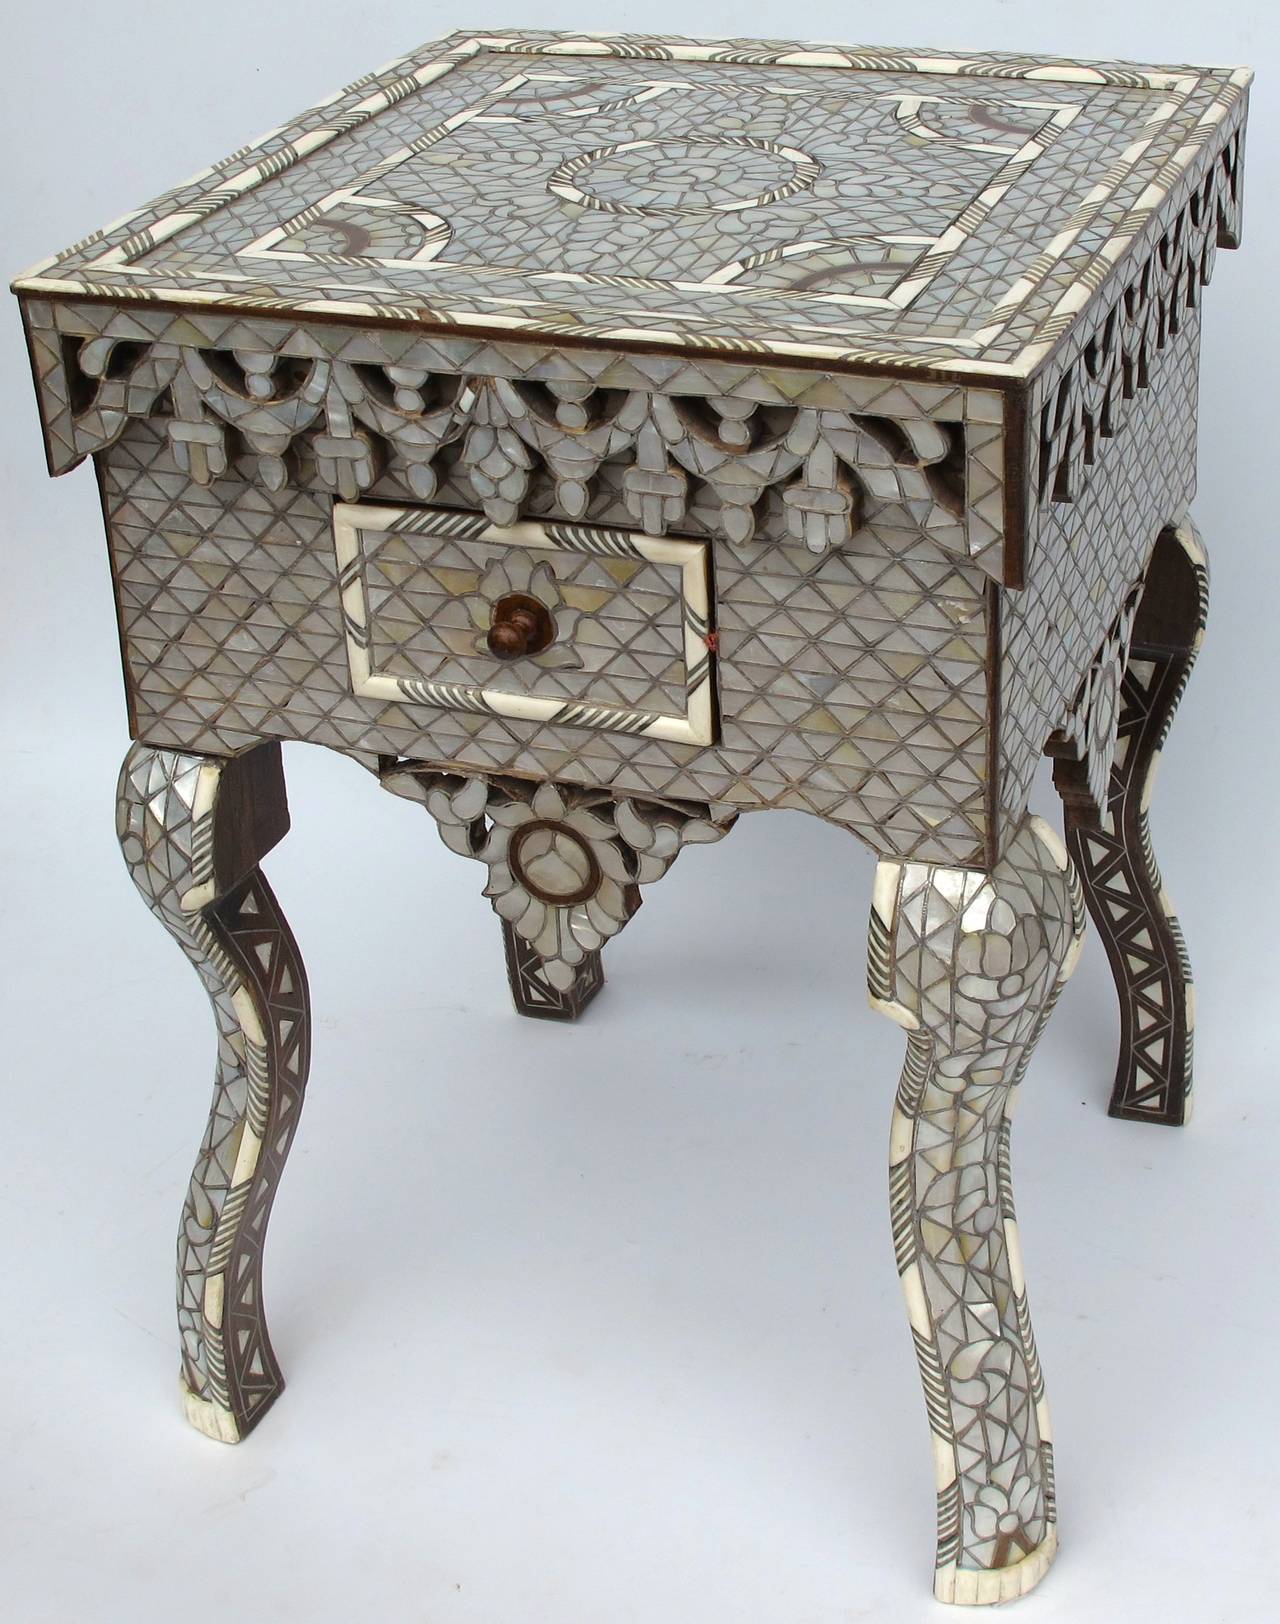 Beautiful pair of Syrian mother-of-pearl inlay side tables with single drawers. Can be sold separate.